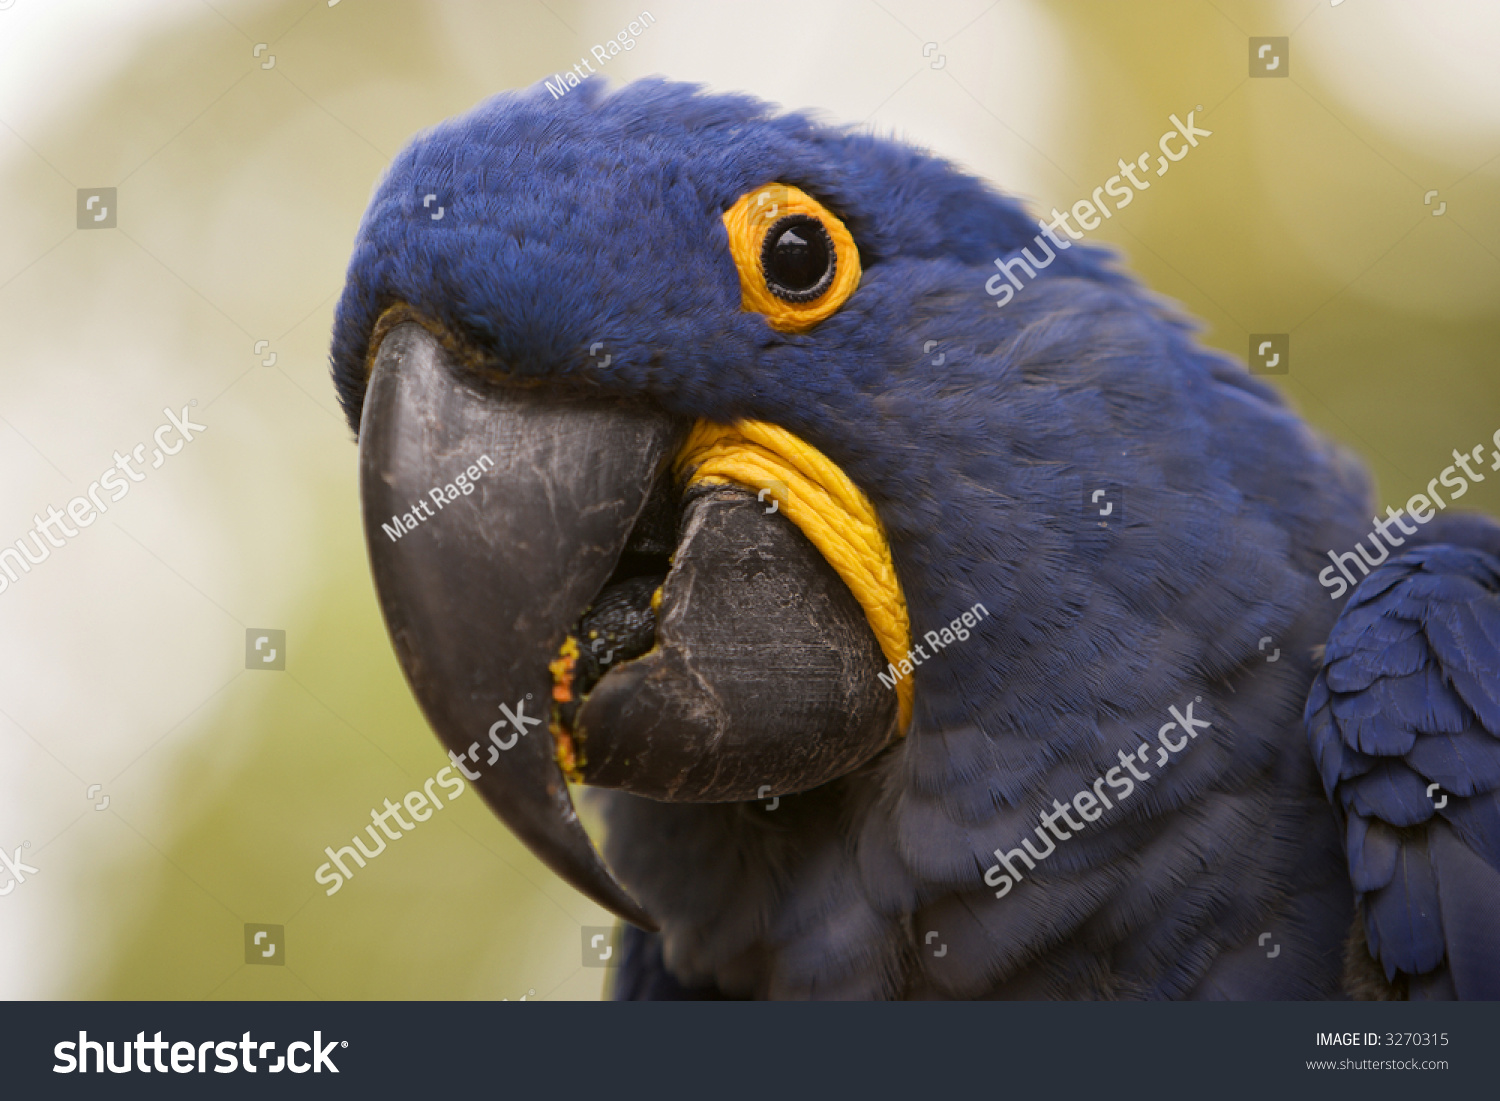 A Closeup Of The Head And Face Of A Hyacinth Macaw (Anodorhynchus ...